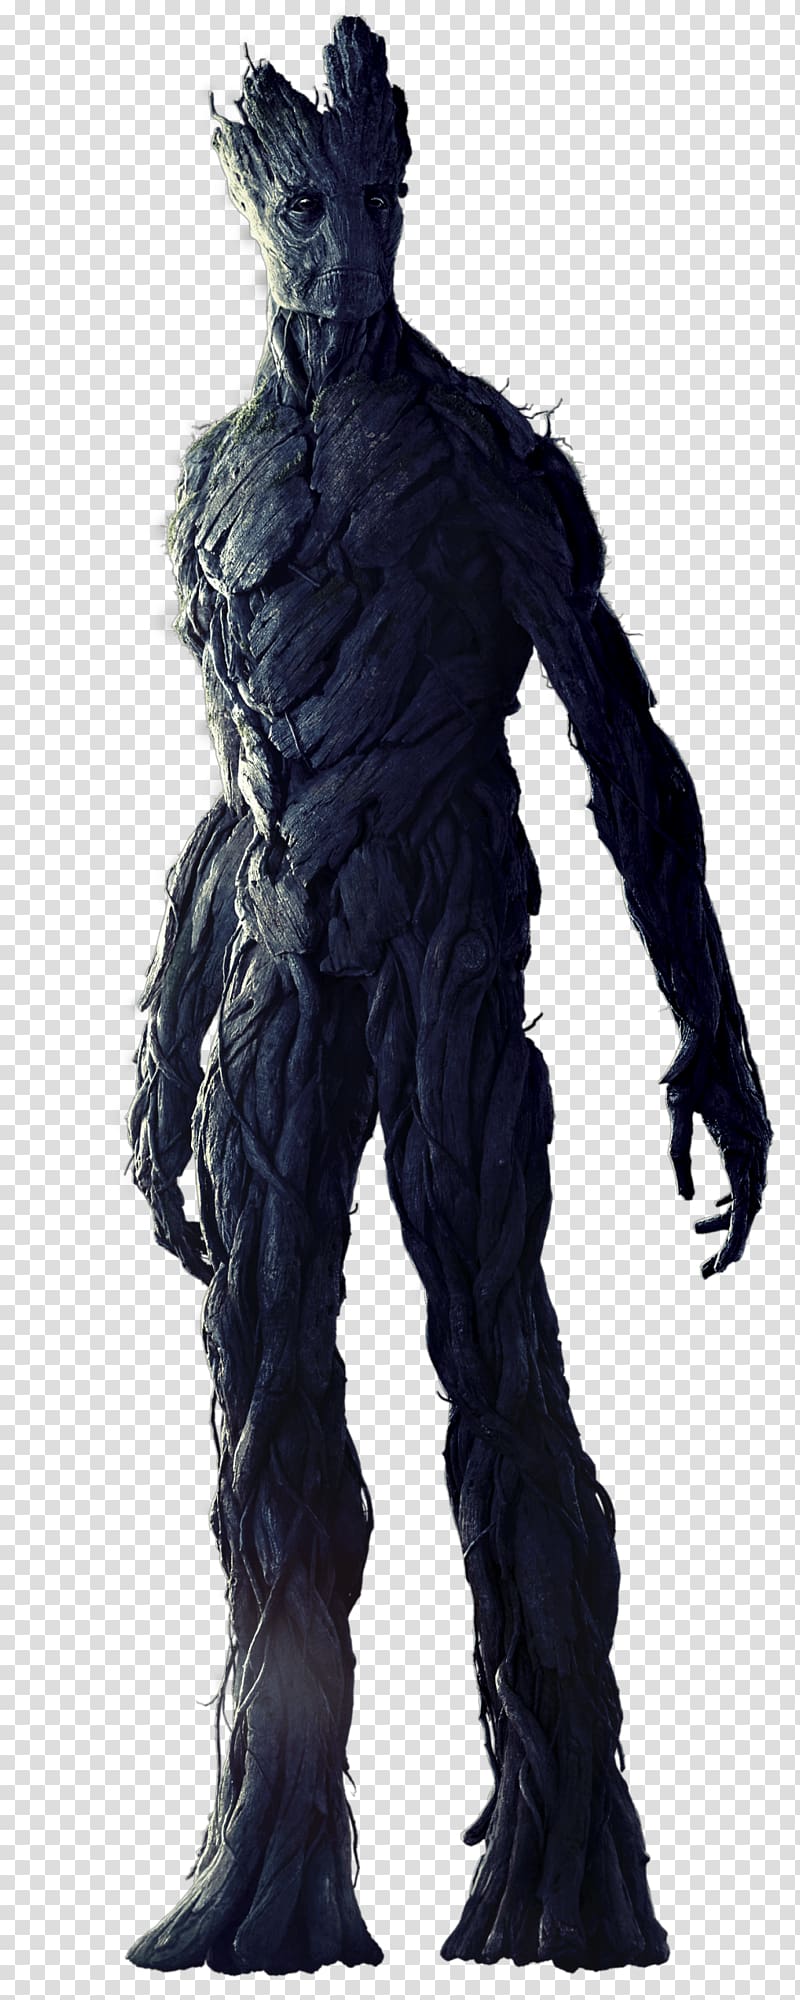 Groot illustration, Guardians Of the Galaxy Groot transparent background PNG clipart